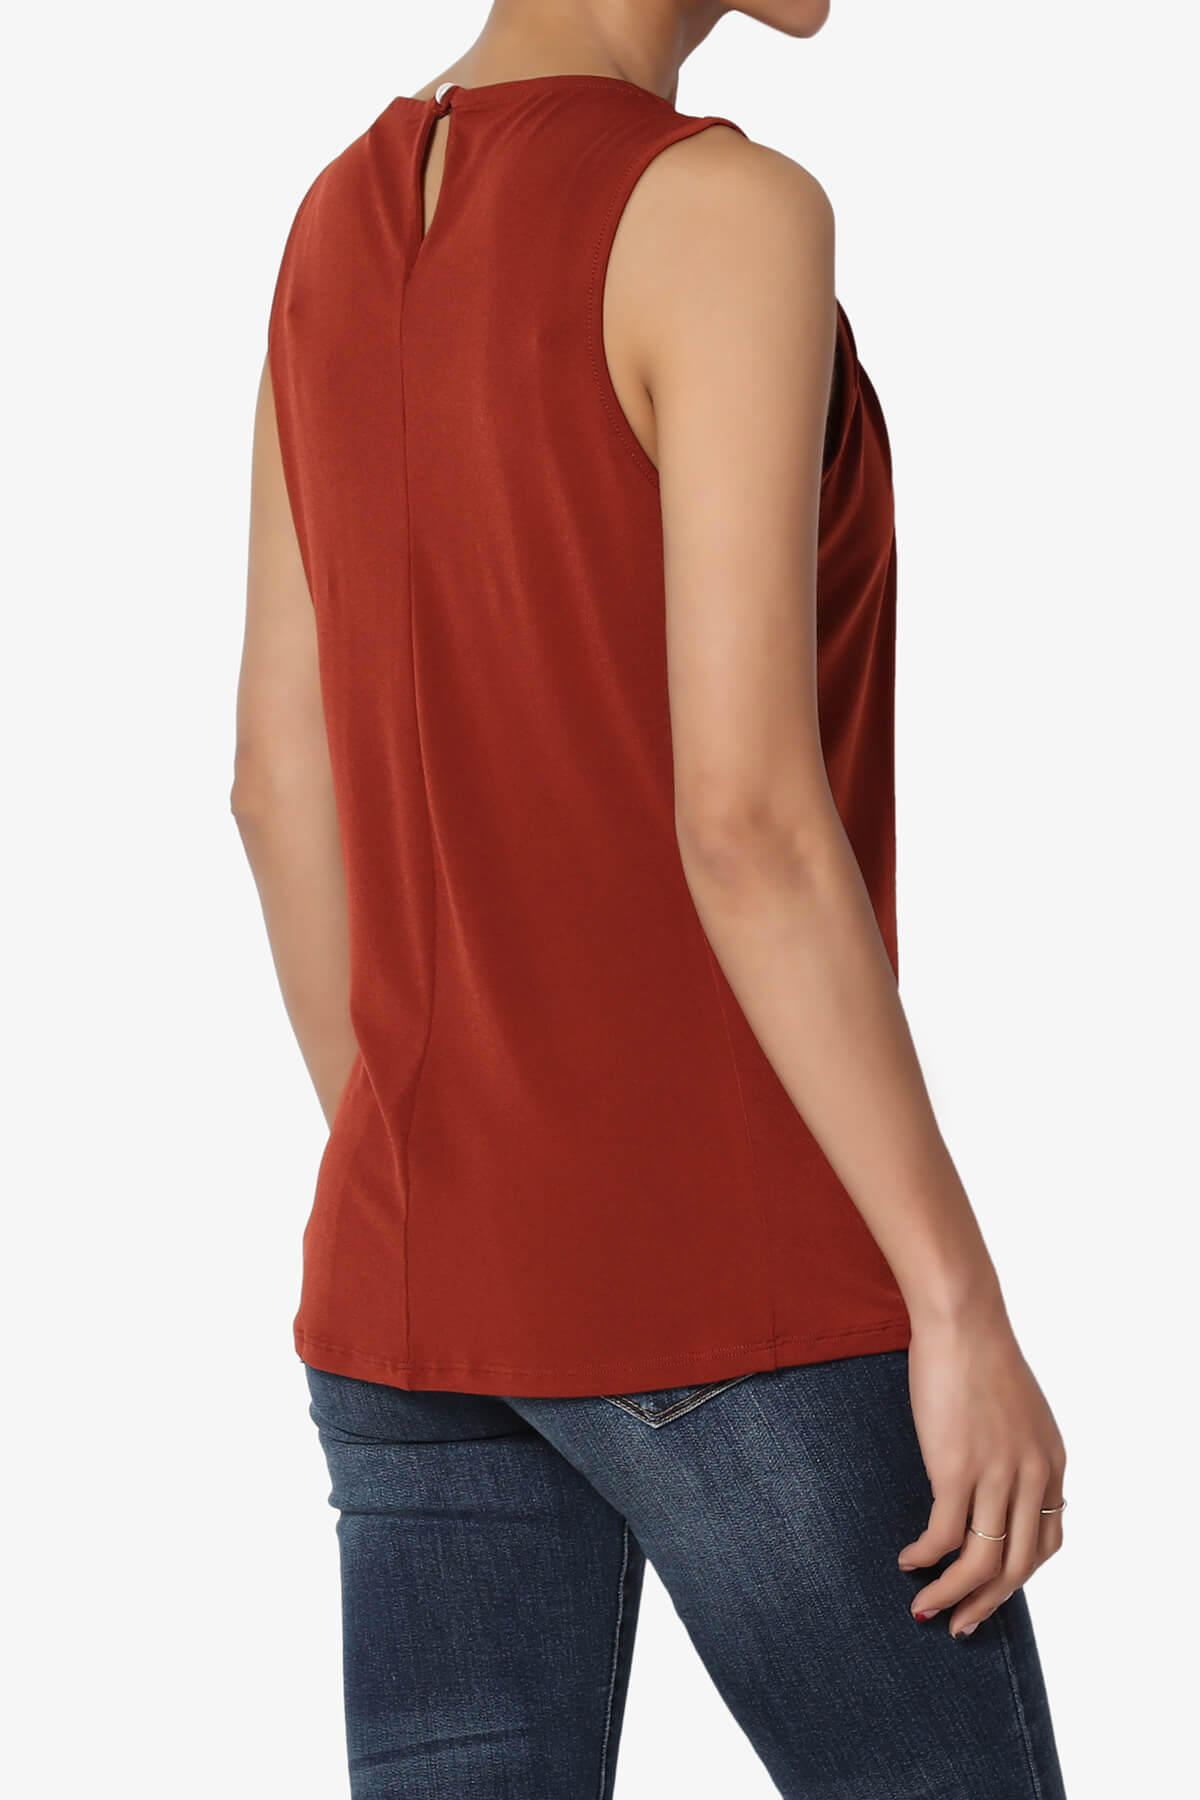 Load image into Gallery viewer, Chaffee Pleat Neck Tank Top DARK RUST_4
